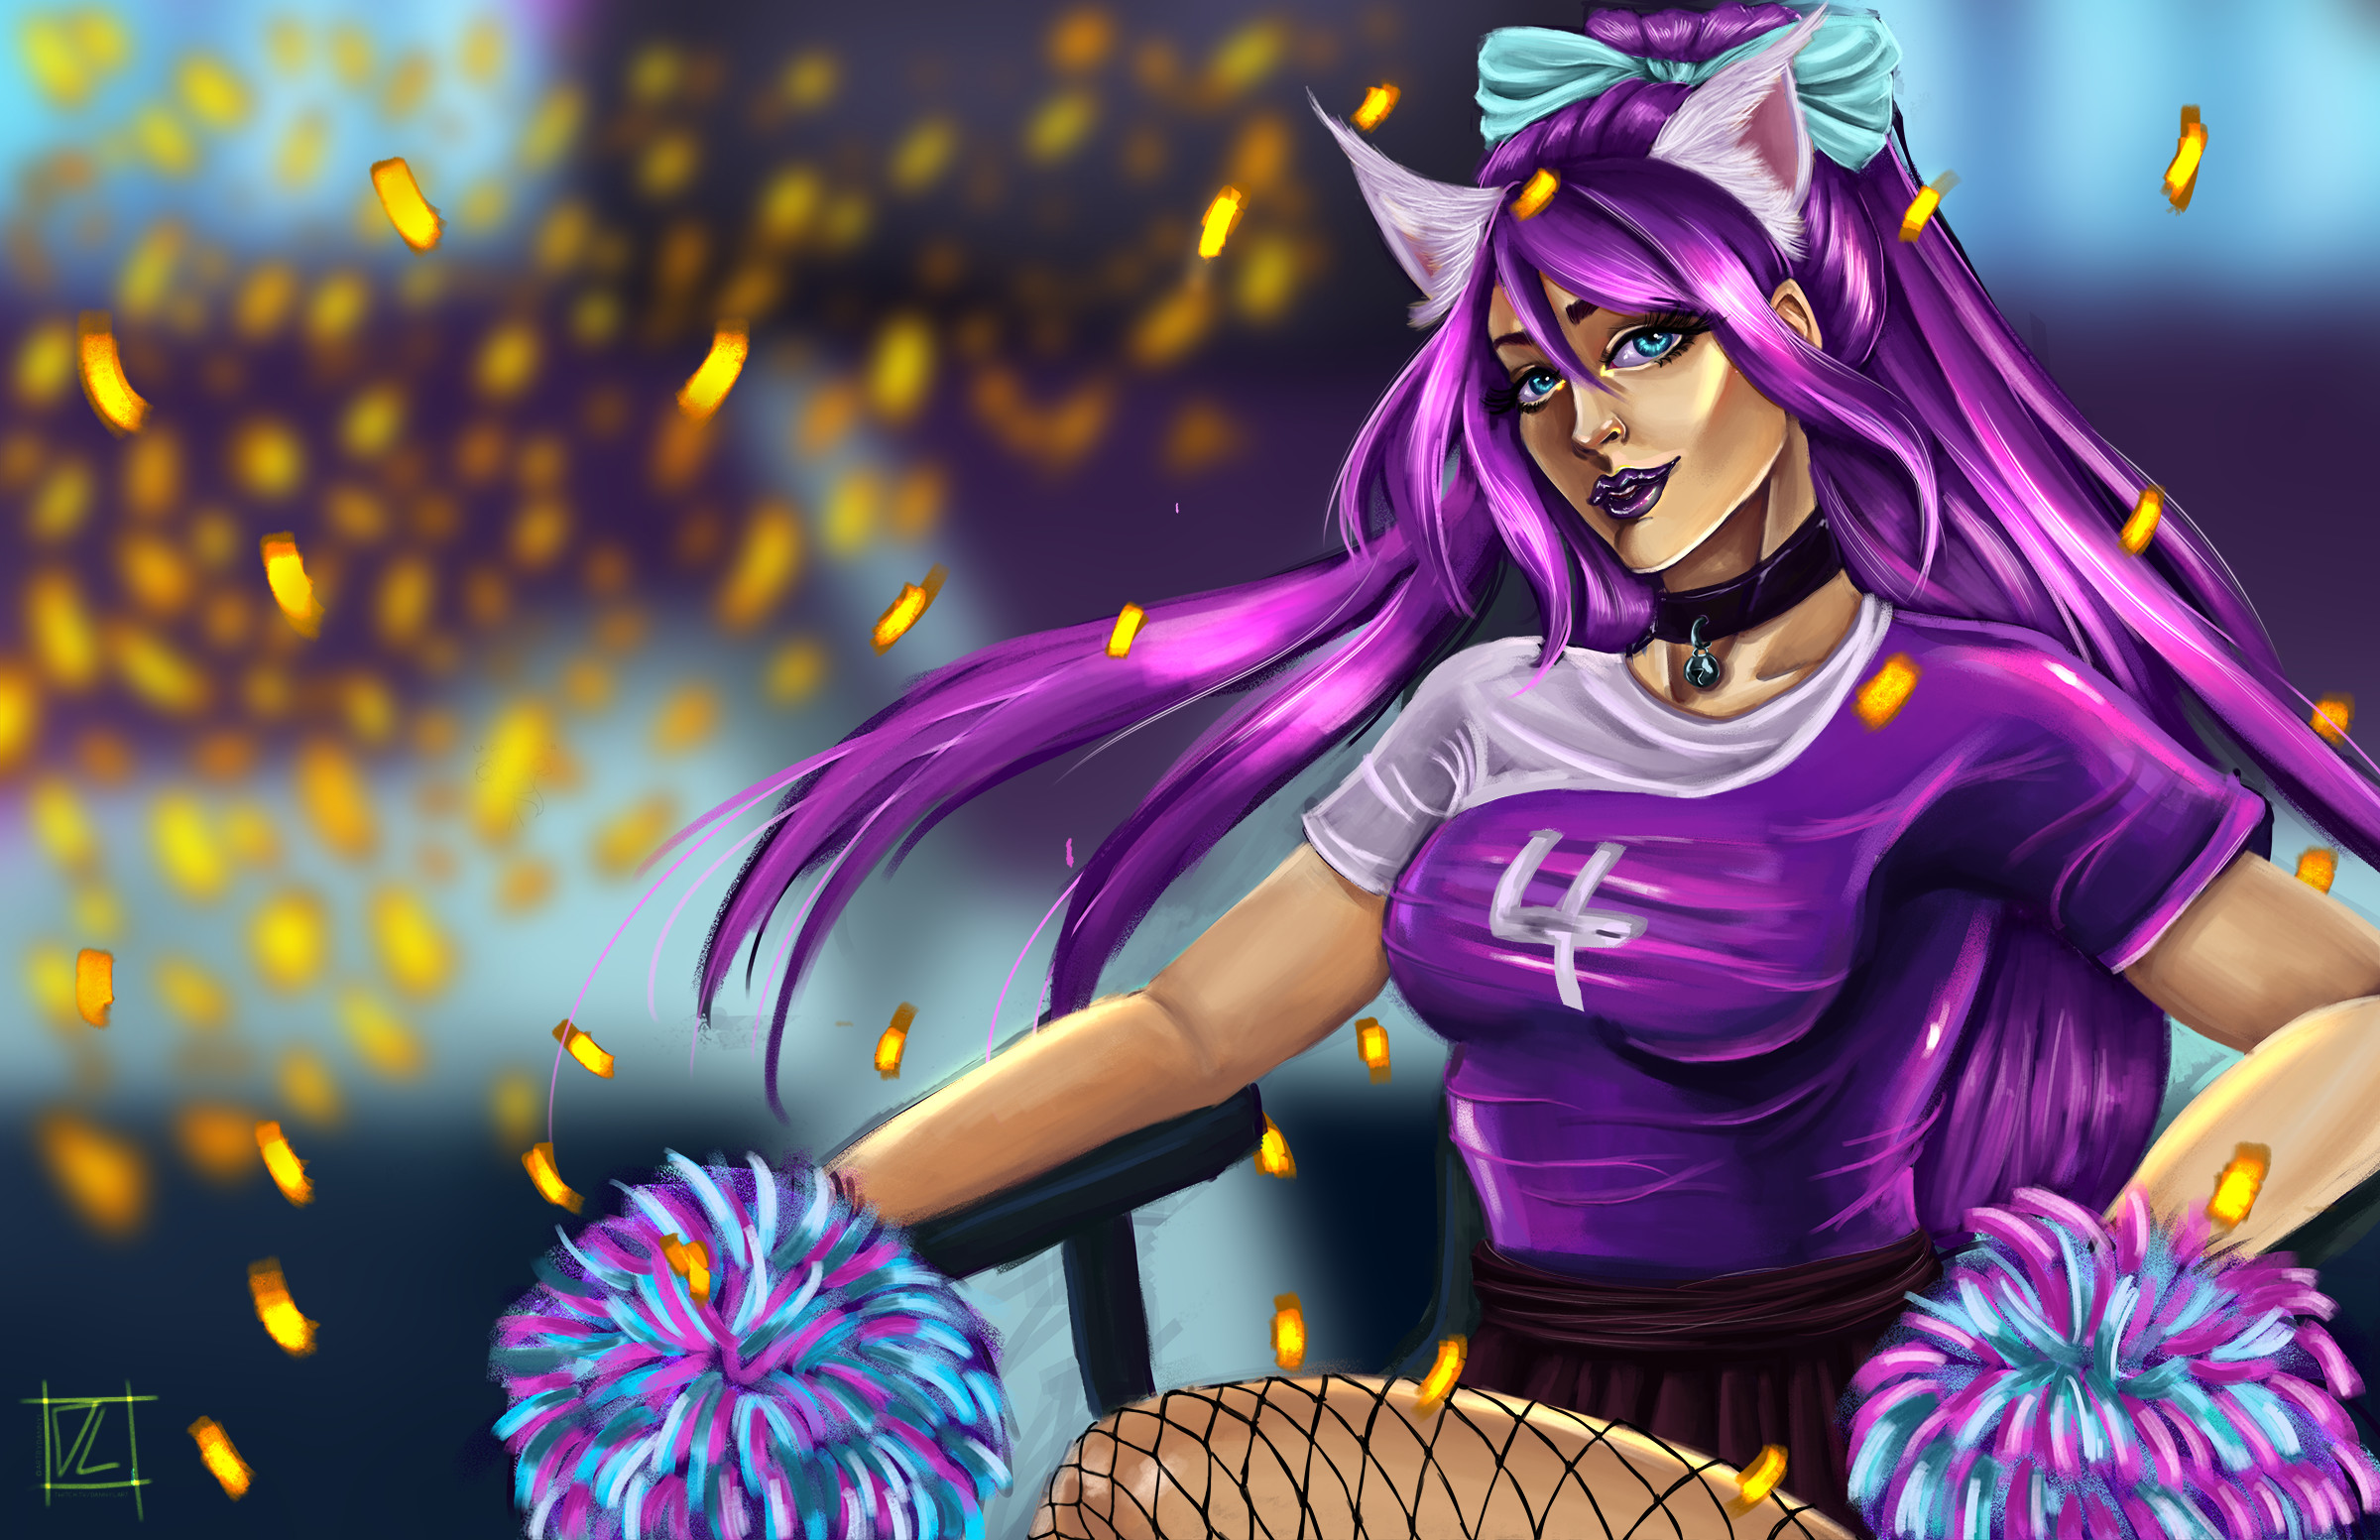 https://twitter.com/danny_l_art/status/1158510326347755520… Worked really hard on my entry to 
Surefour's #MyTisumi contest. Painted the whole thing start to finish on stream, I hope you guys like it and fingers crossed!! #lagladiators #OWL2019 #twitch